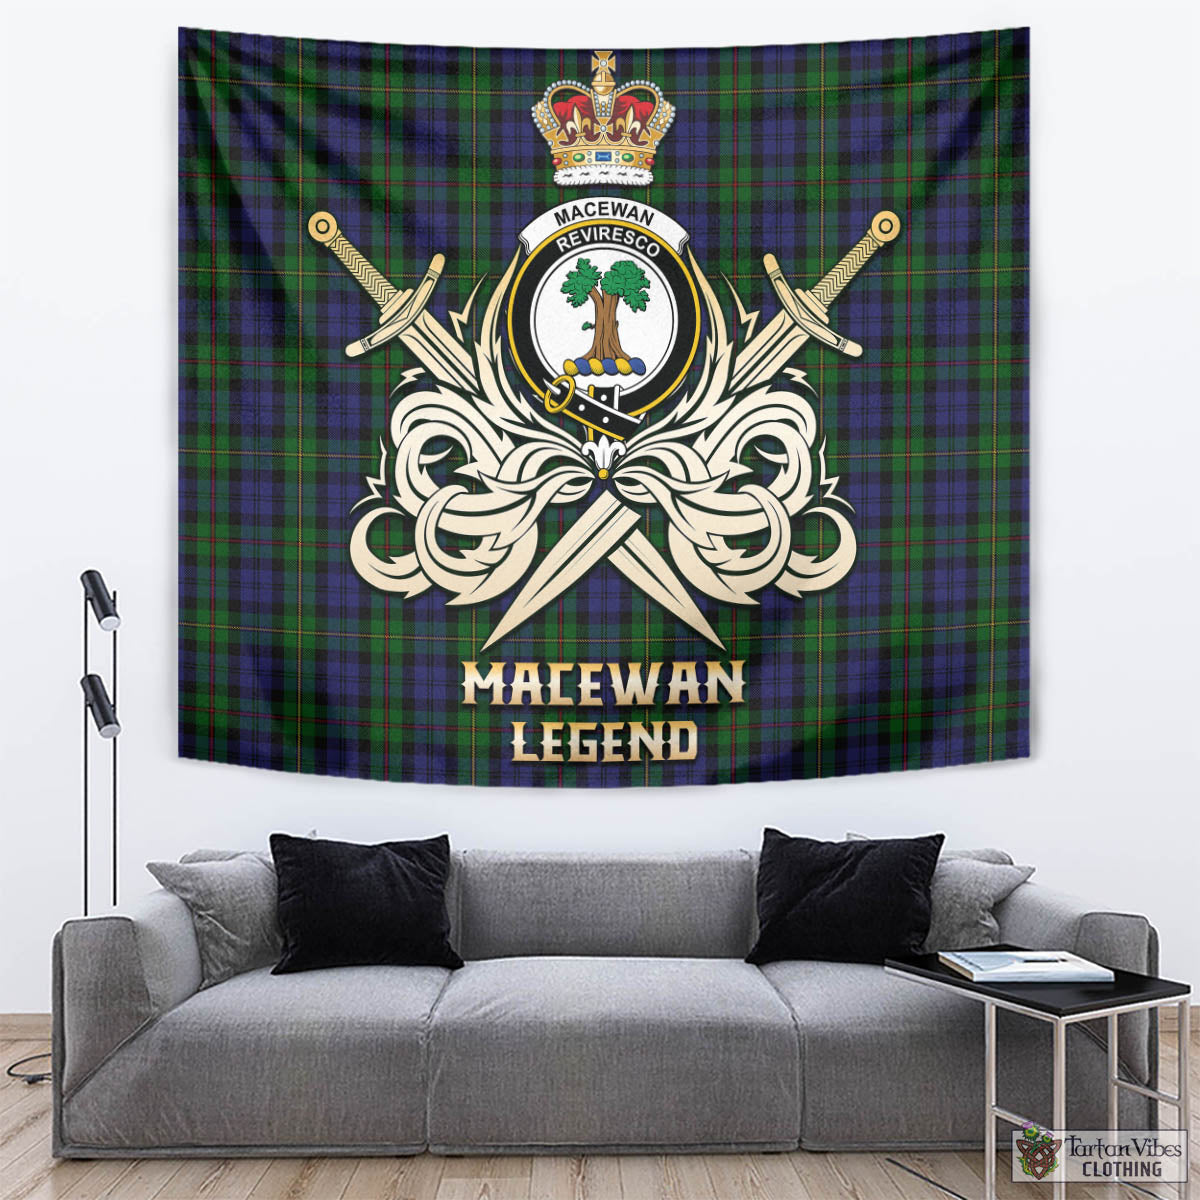 Tartan Vibes Clothing MacEwan Tartan Tapestry with Clan Crest and the Golden Sword of Courageous Legacy